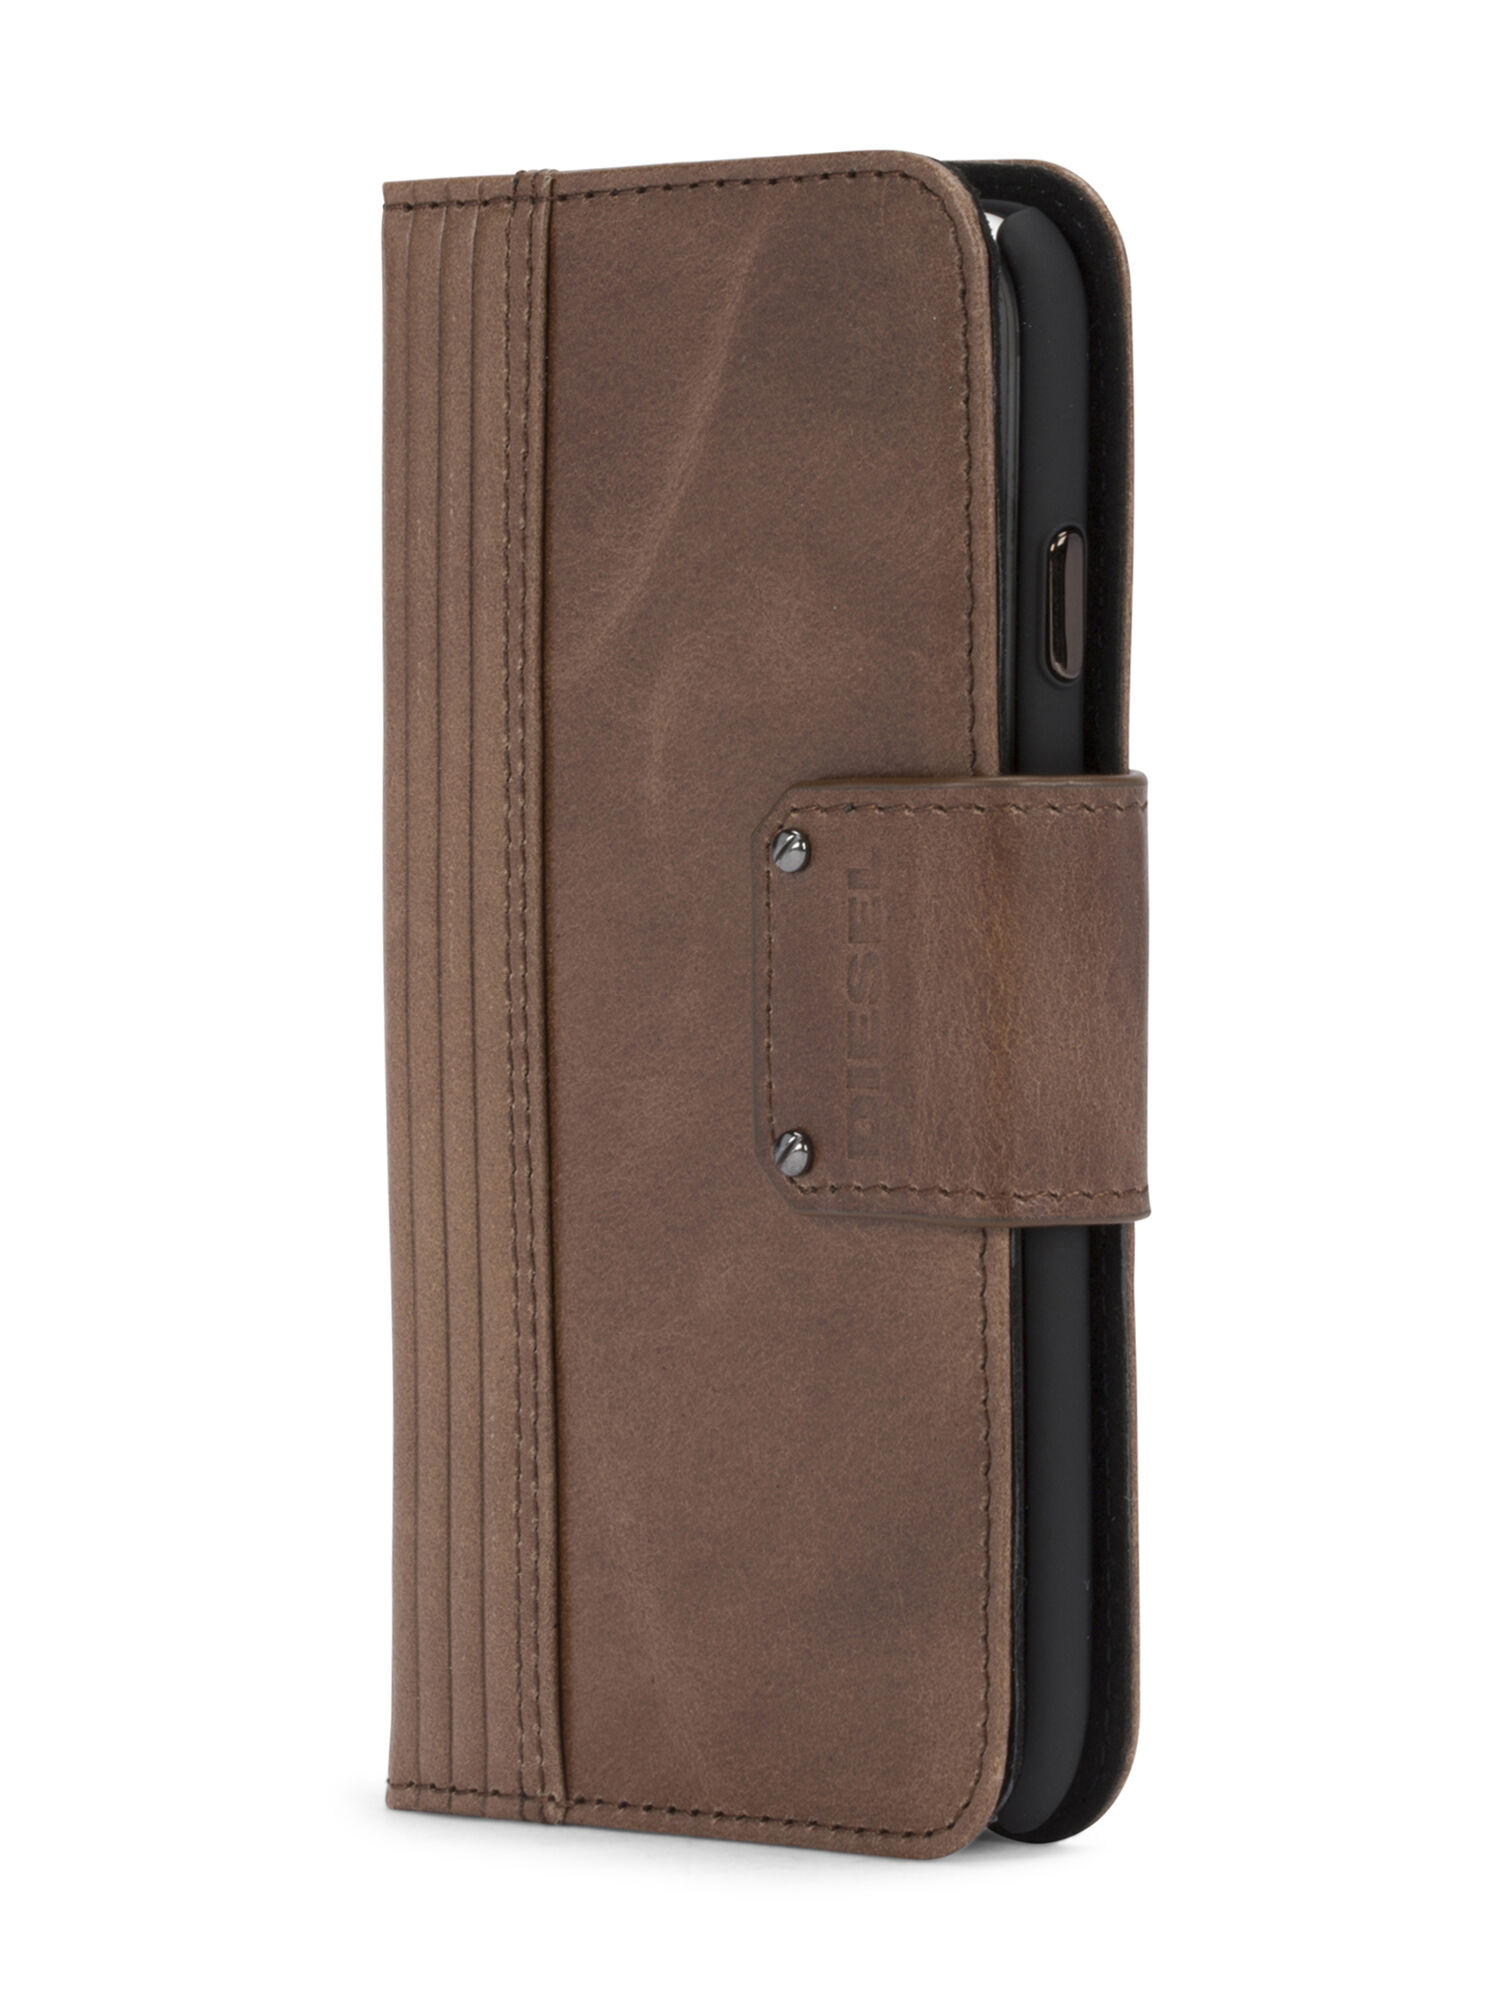 Diesel - BROWN LINED LEATHER IPHONE 8/7 FOLIO,  - Image 2